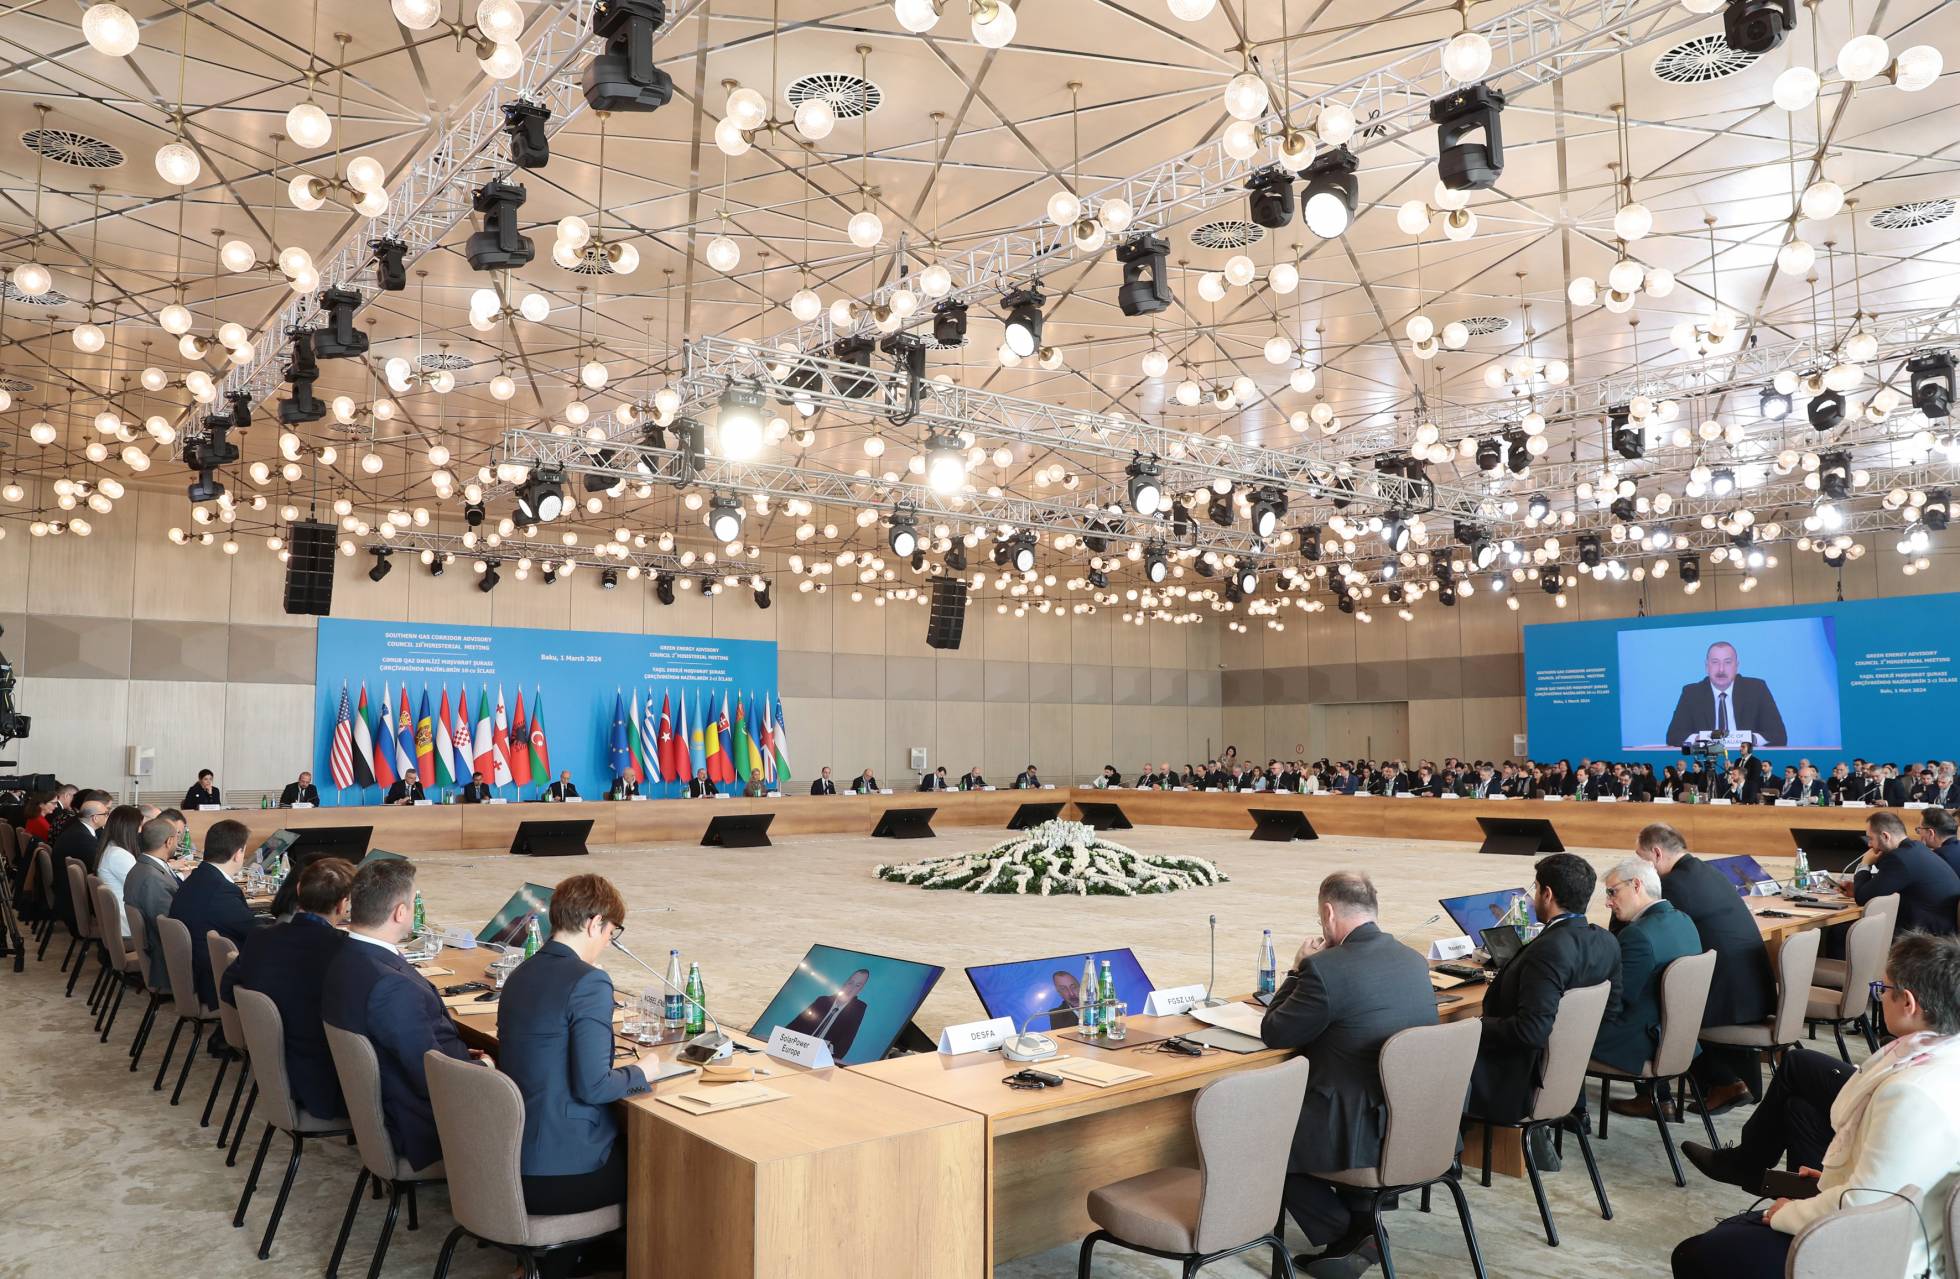 10th Southern Gas Corridor Advisory Council Ministerial Meeting and 2nd Green Energy Advisory Council Ministerial Meeting was held in Baku